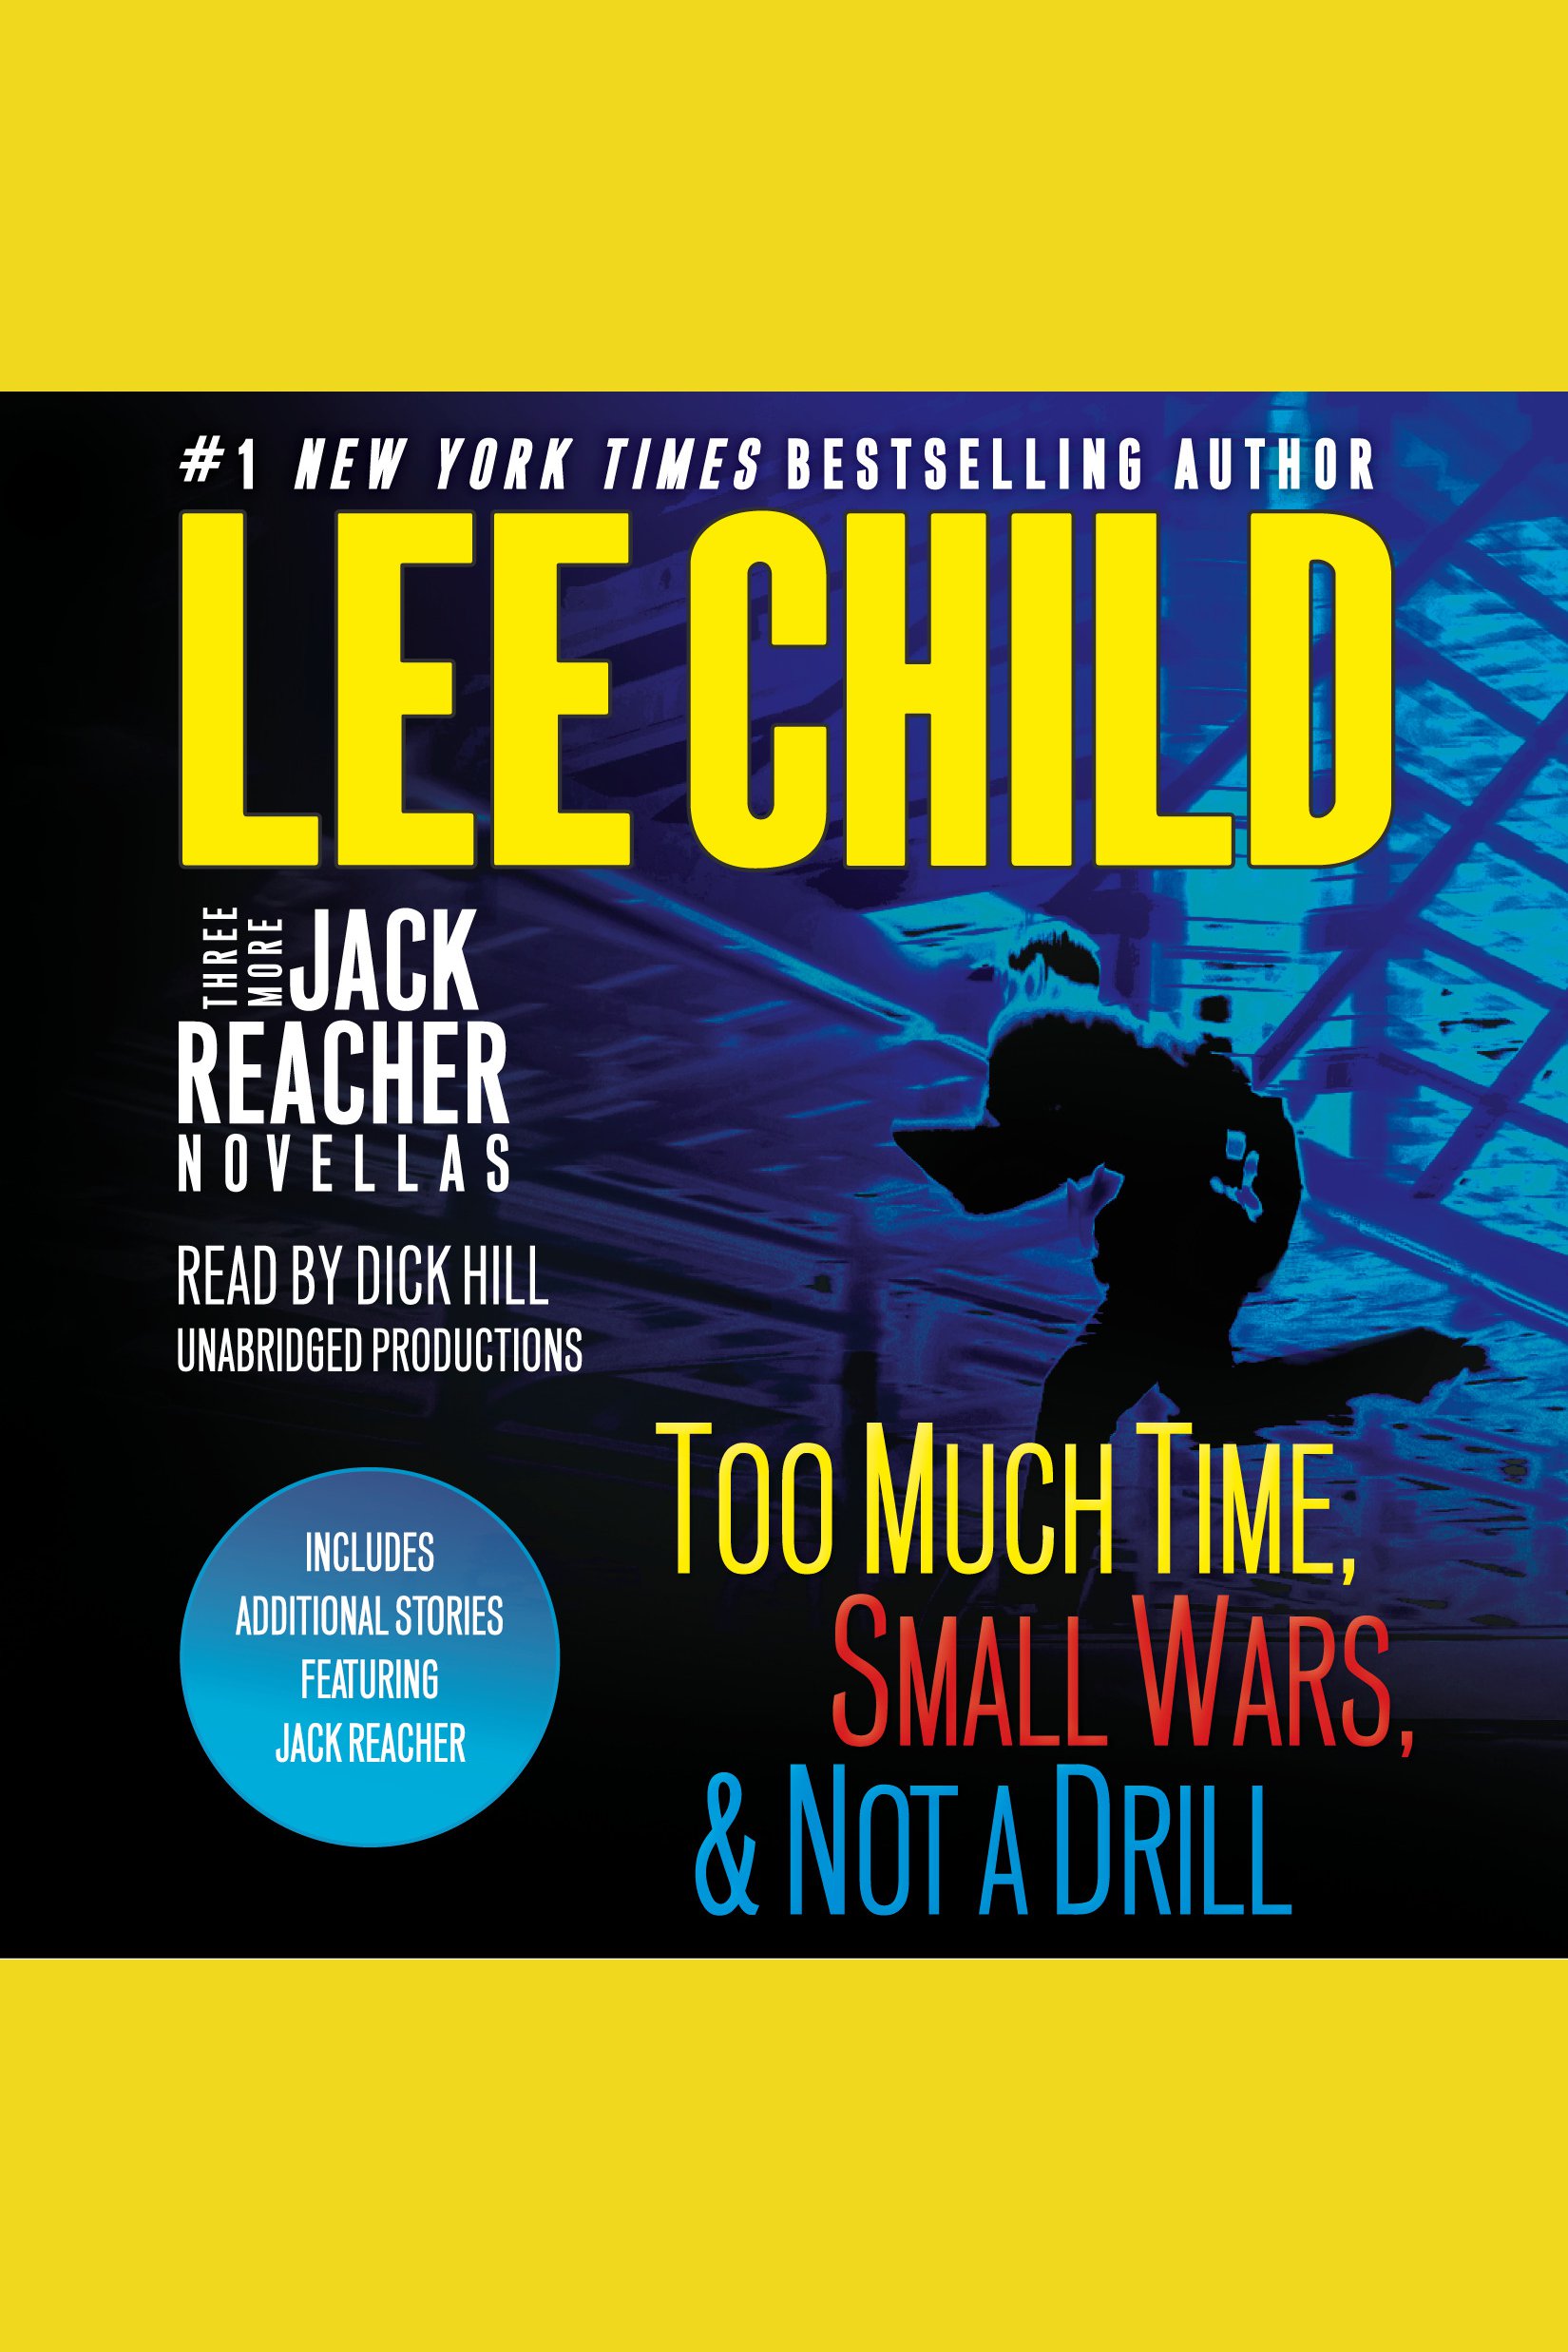 Imagen de portada para Three More Jack Reacher Novellas [electronic resource] : Too Much Time, Small Wars, Not a Drill, Plus Additional Stories